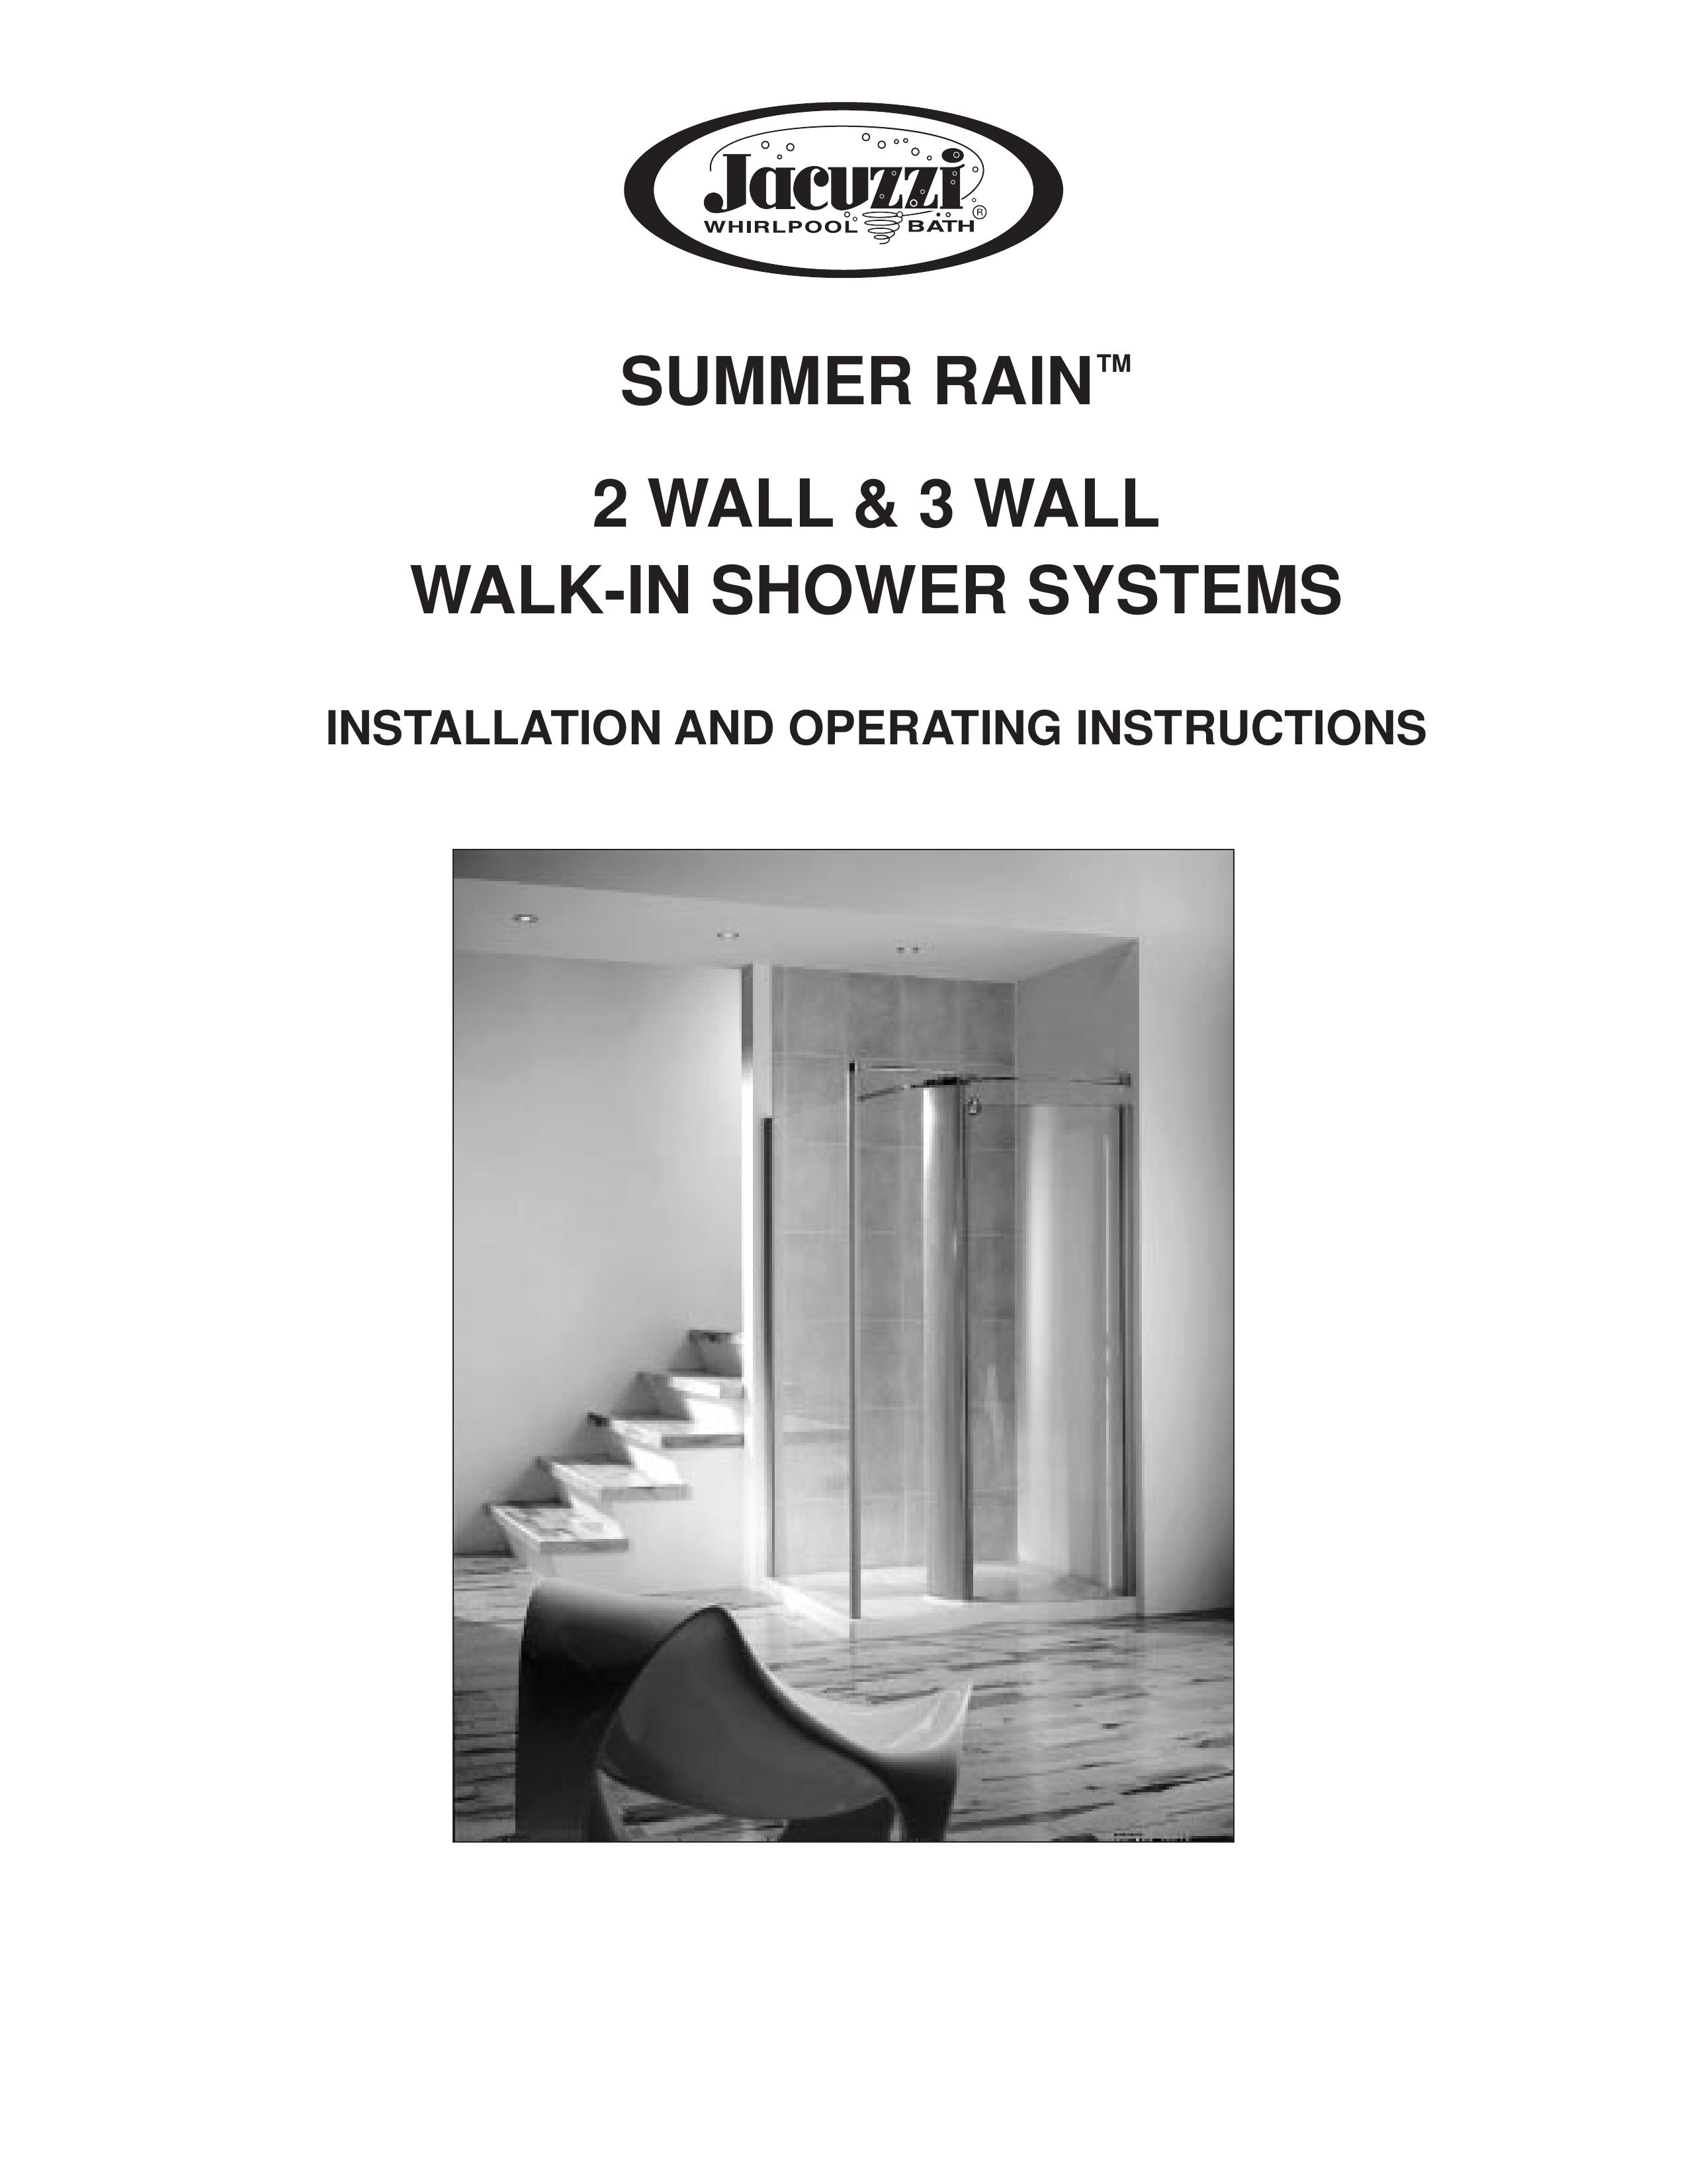 Jacuzzi SUMMER RAINTM 2 WALL & 3 WALL WALK-IN SHOWER SYSTEMS Outdoor Shower User Manual